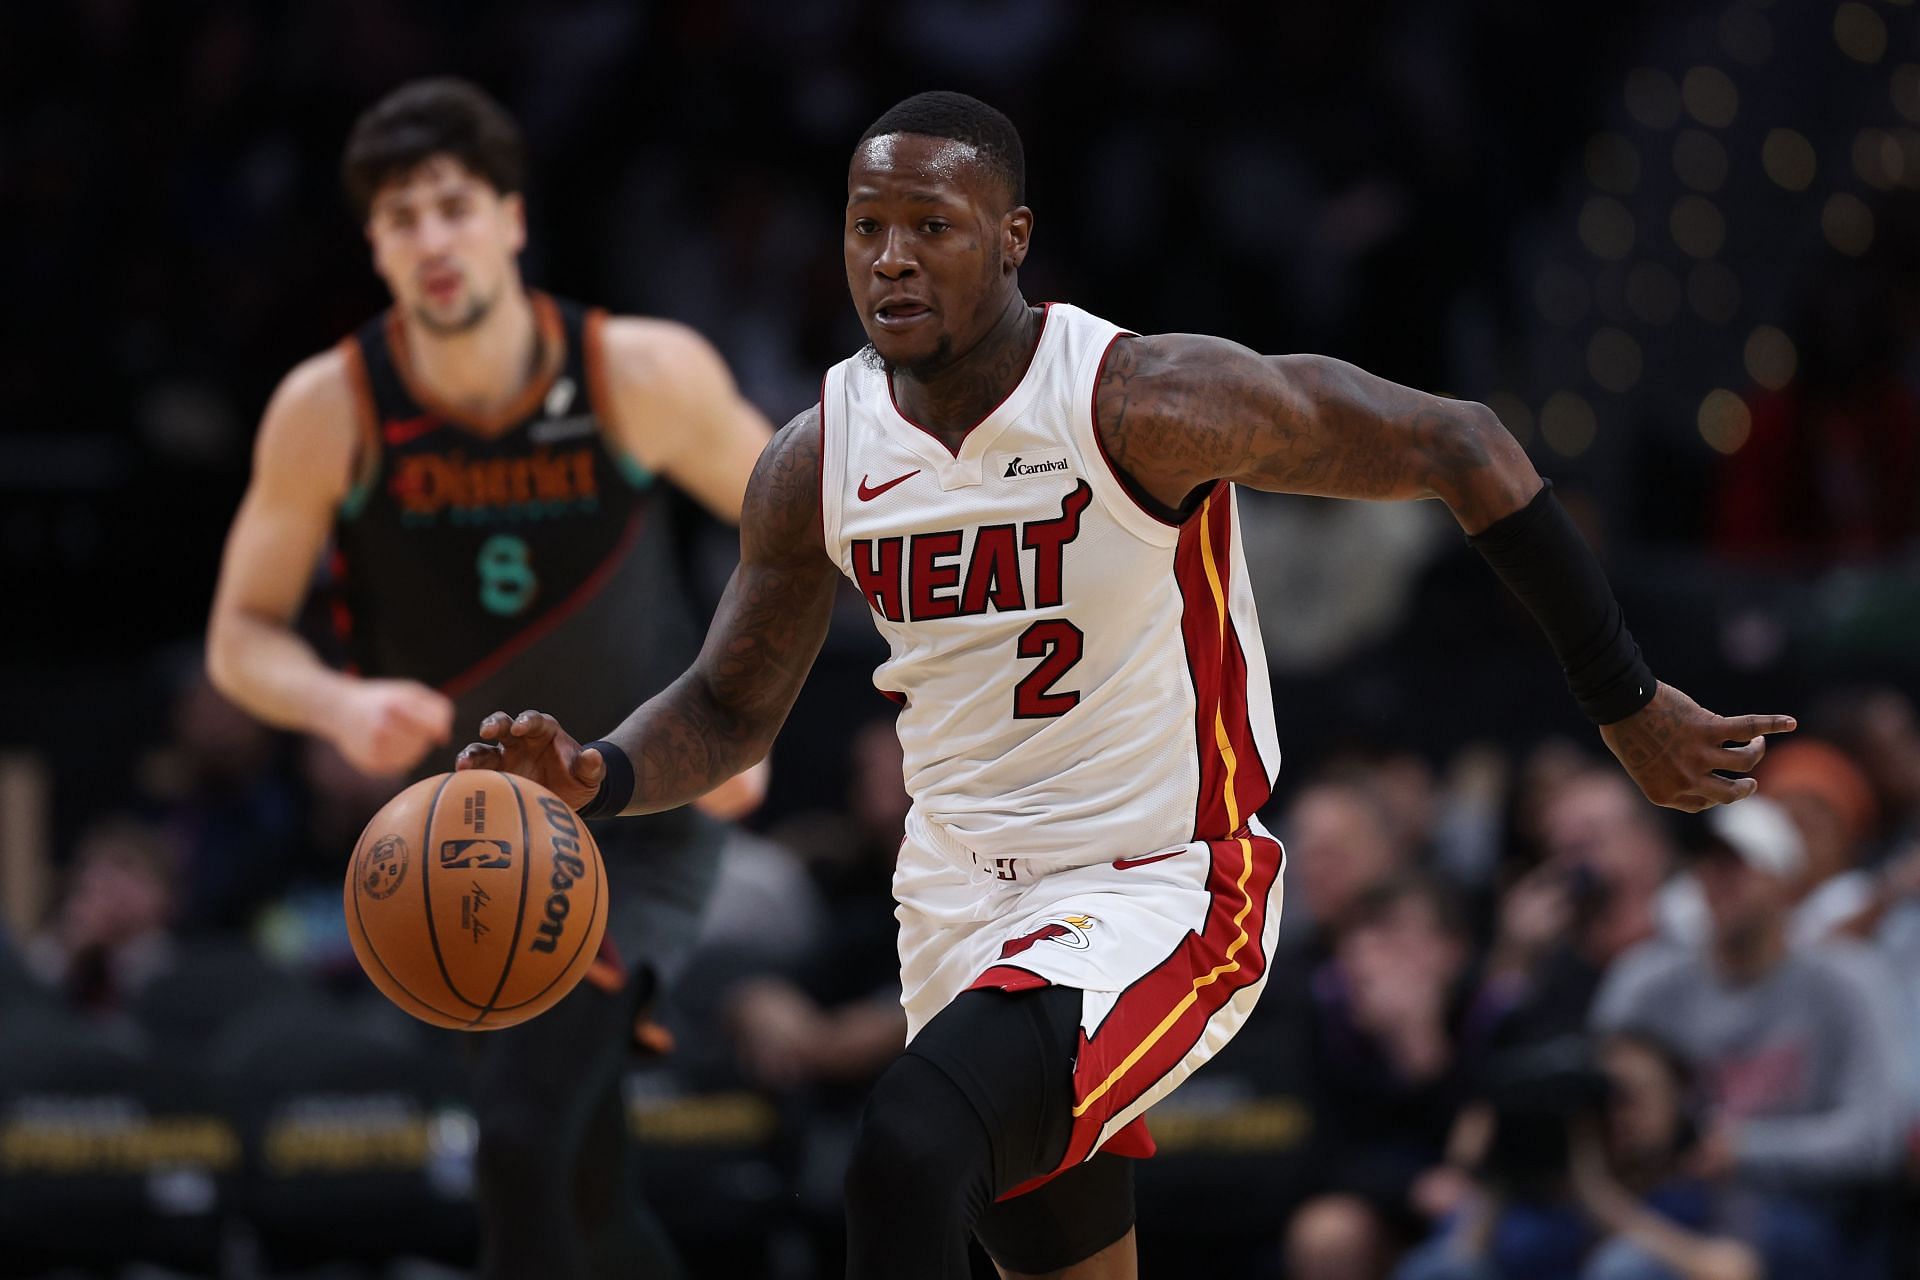 When will Terry Rozier return?